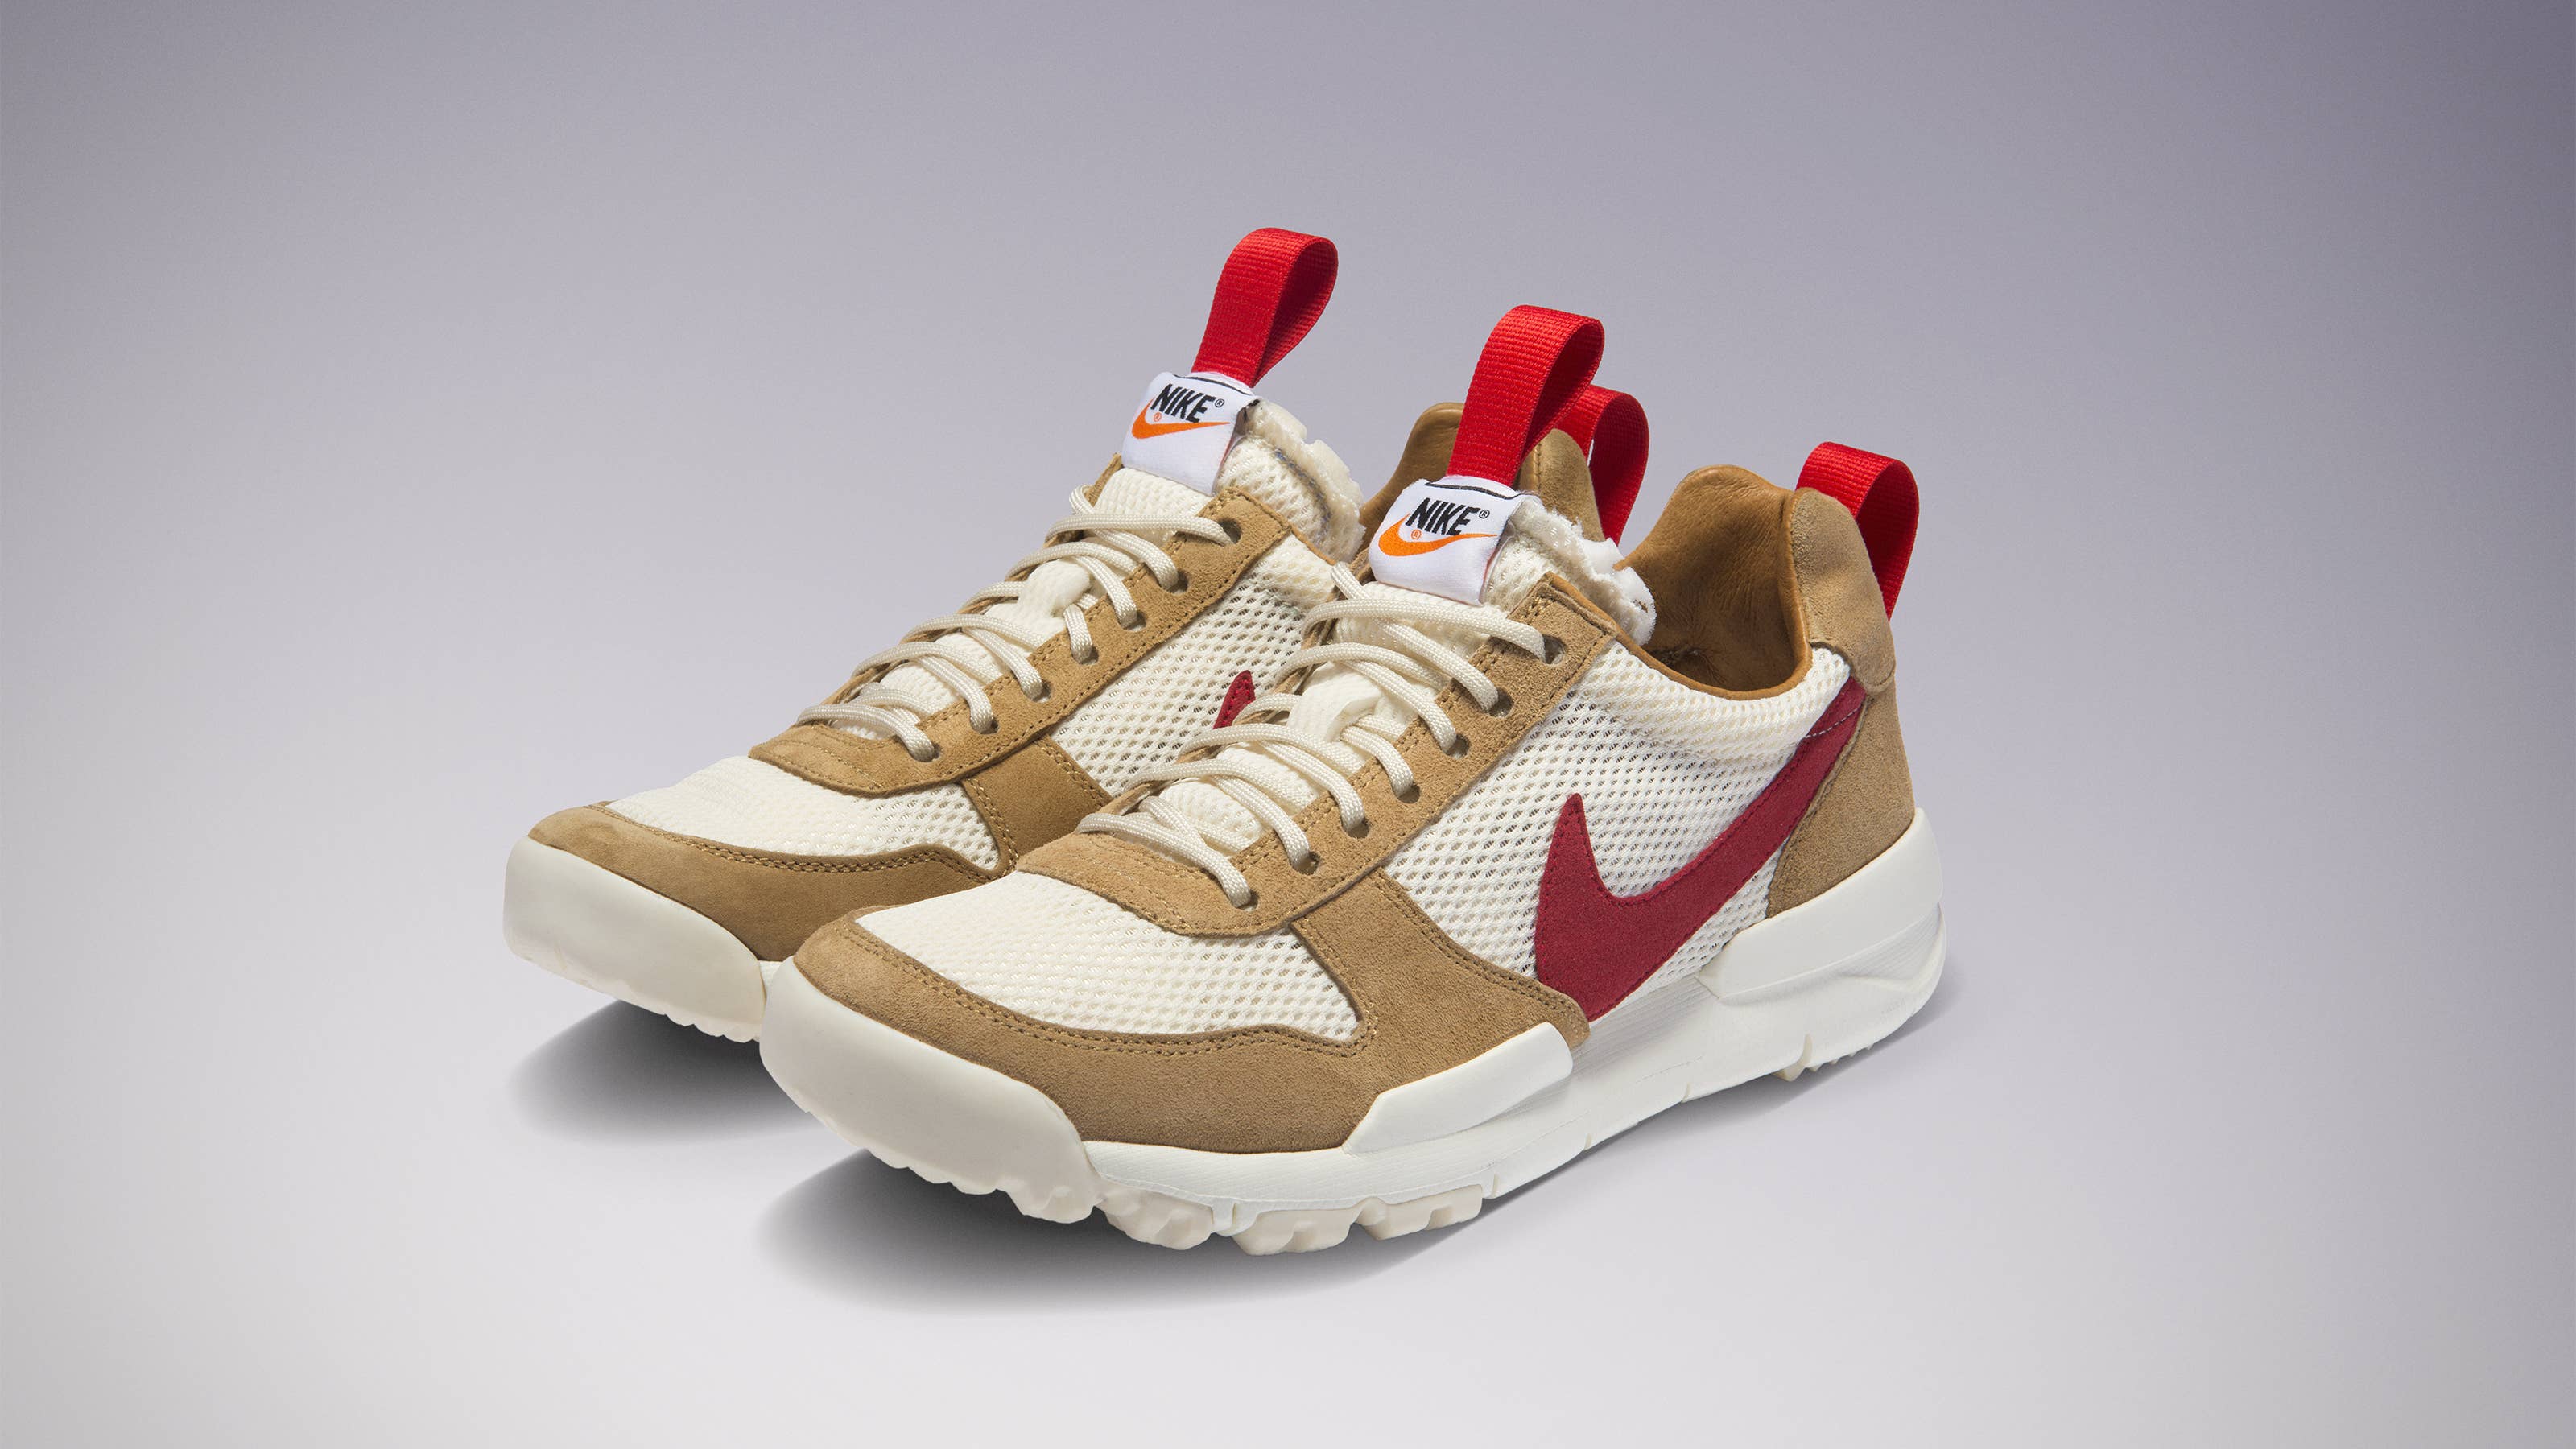 Tom Sachs Explains Why His Nike Collab Is the Best of All Time